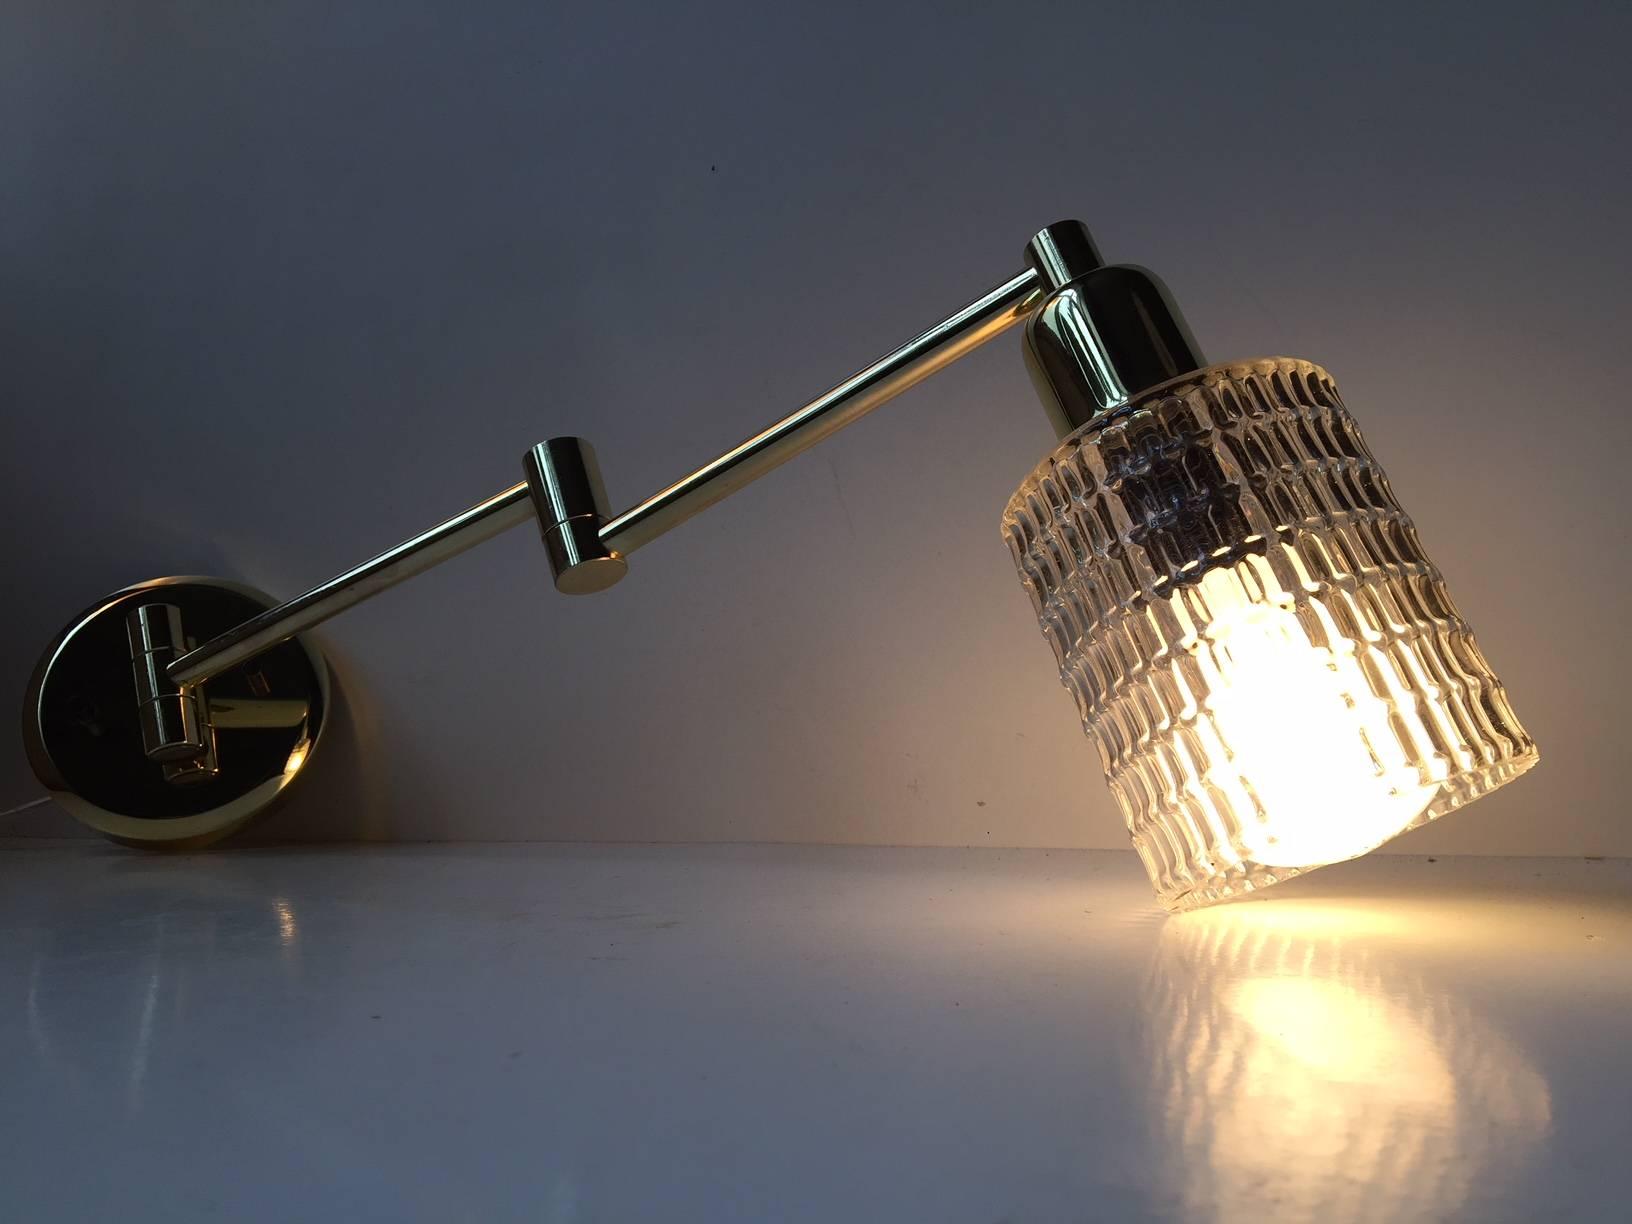 Adjustable angle poise wall light. Made of polished solid brass. Mounted with a diamond patterned clear glass shade. Manufactured by ABO metal art in Denmark during the 1980s.